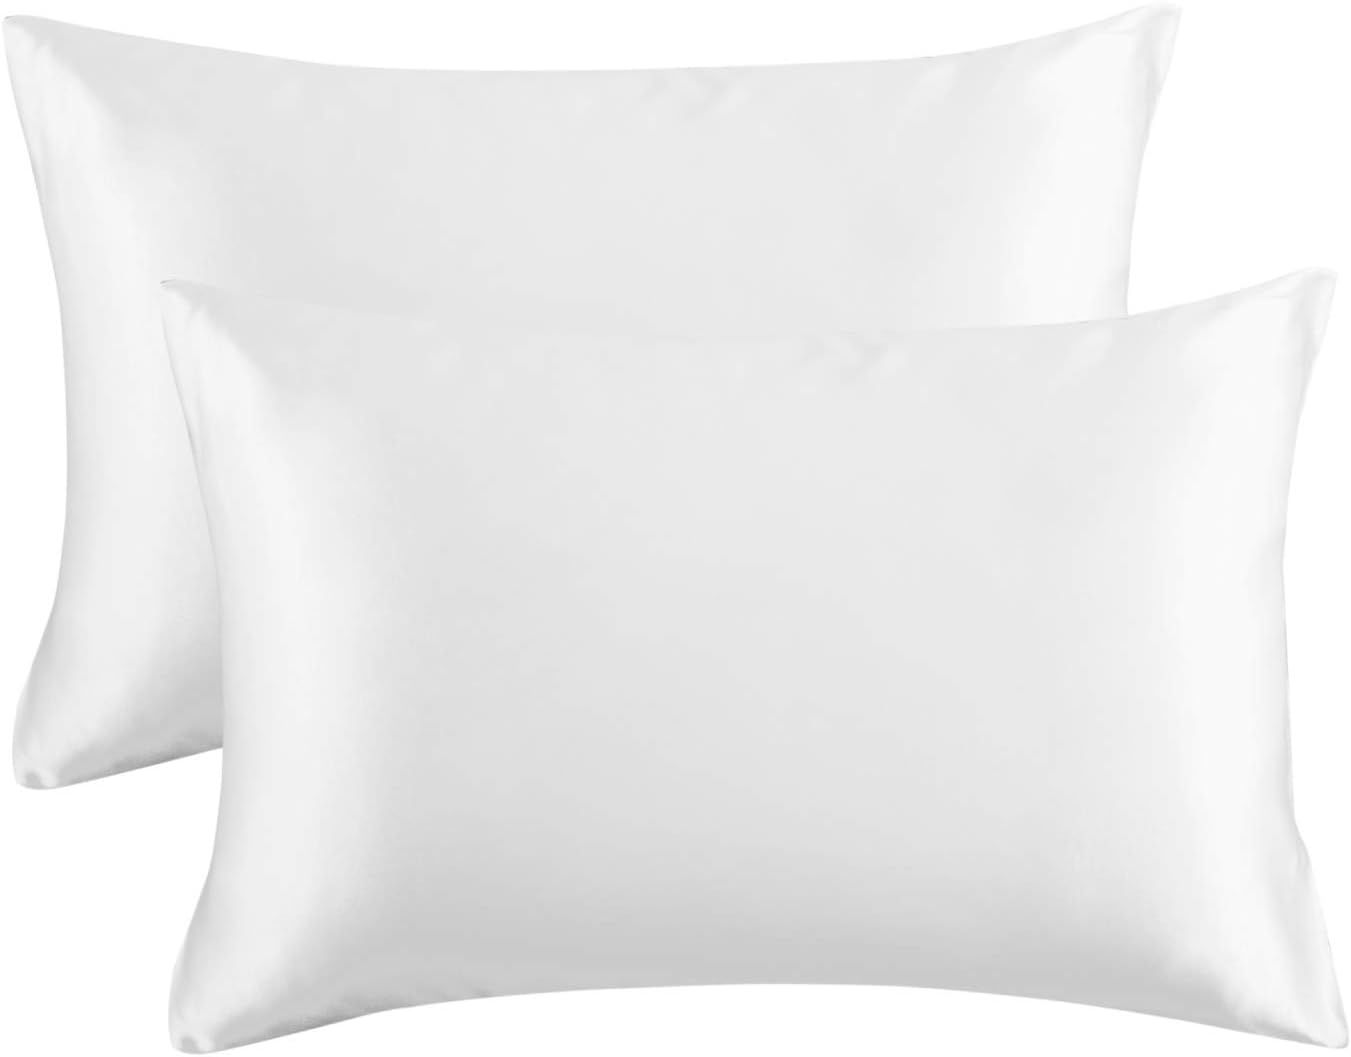 Bedsure Satin Pillowcase for Hair and Skin, 2-Pack - Standard Size (20x26 inches) Pillow Cases - ... | Amazon (US)